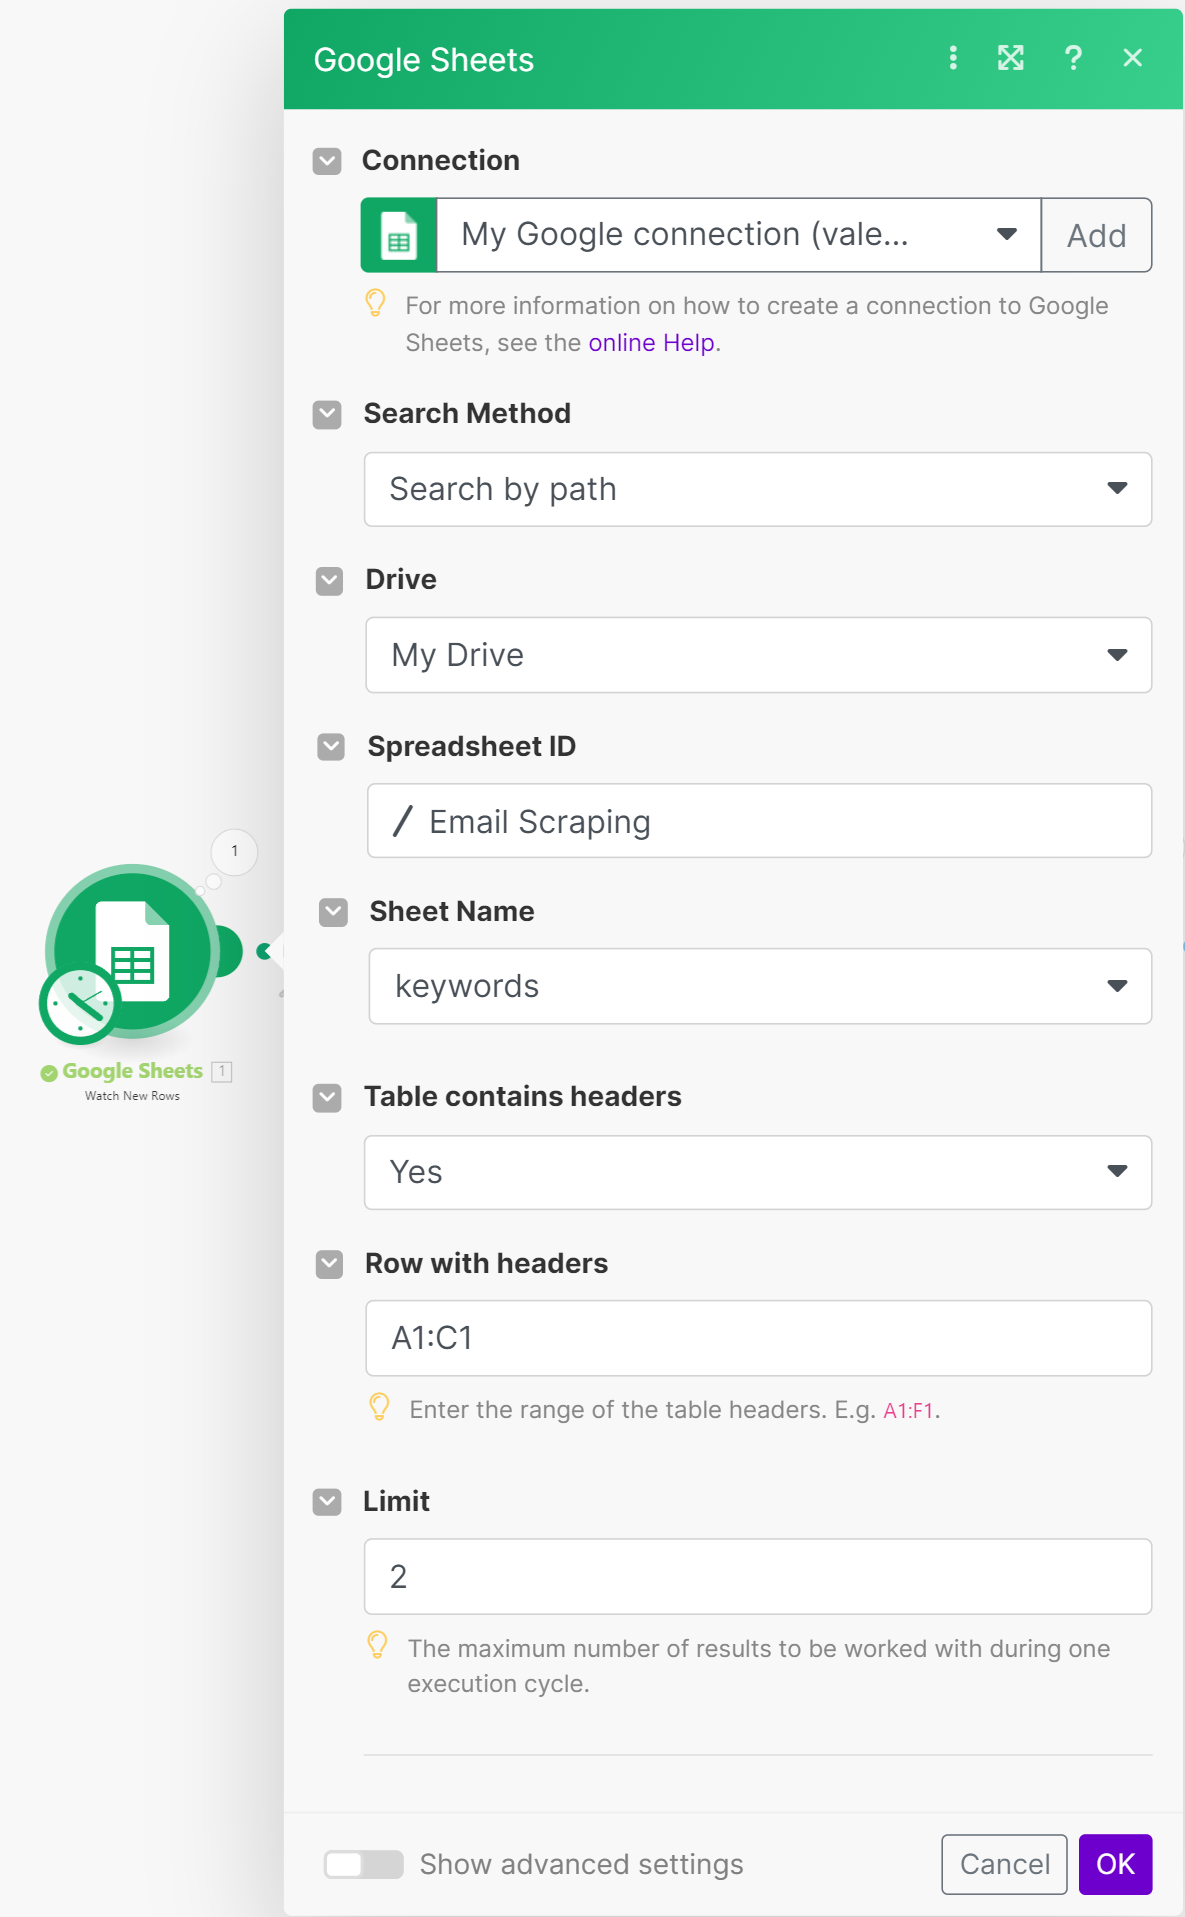 Select a new action and find the Google Sheets integrations and the method for searching for new rows